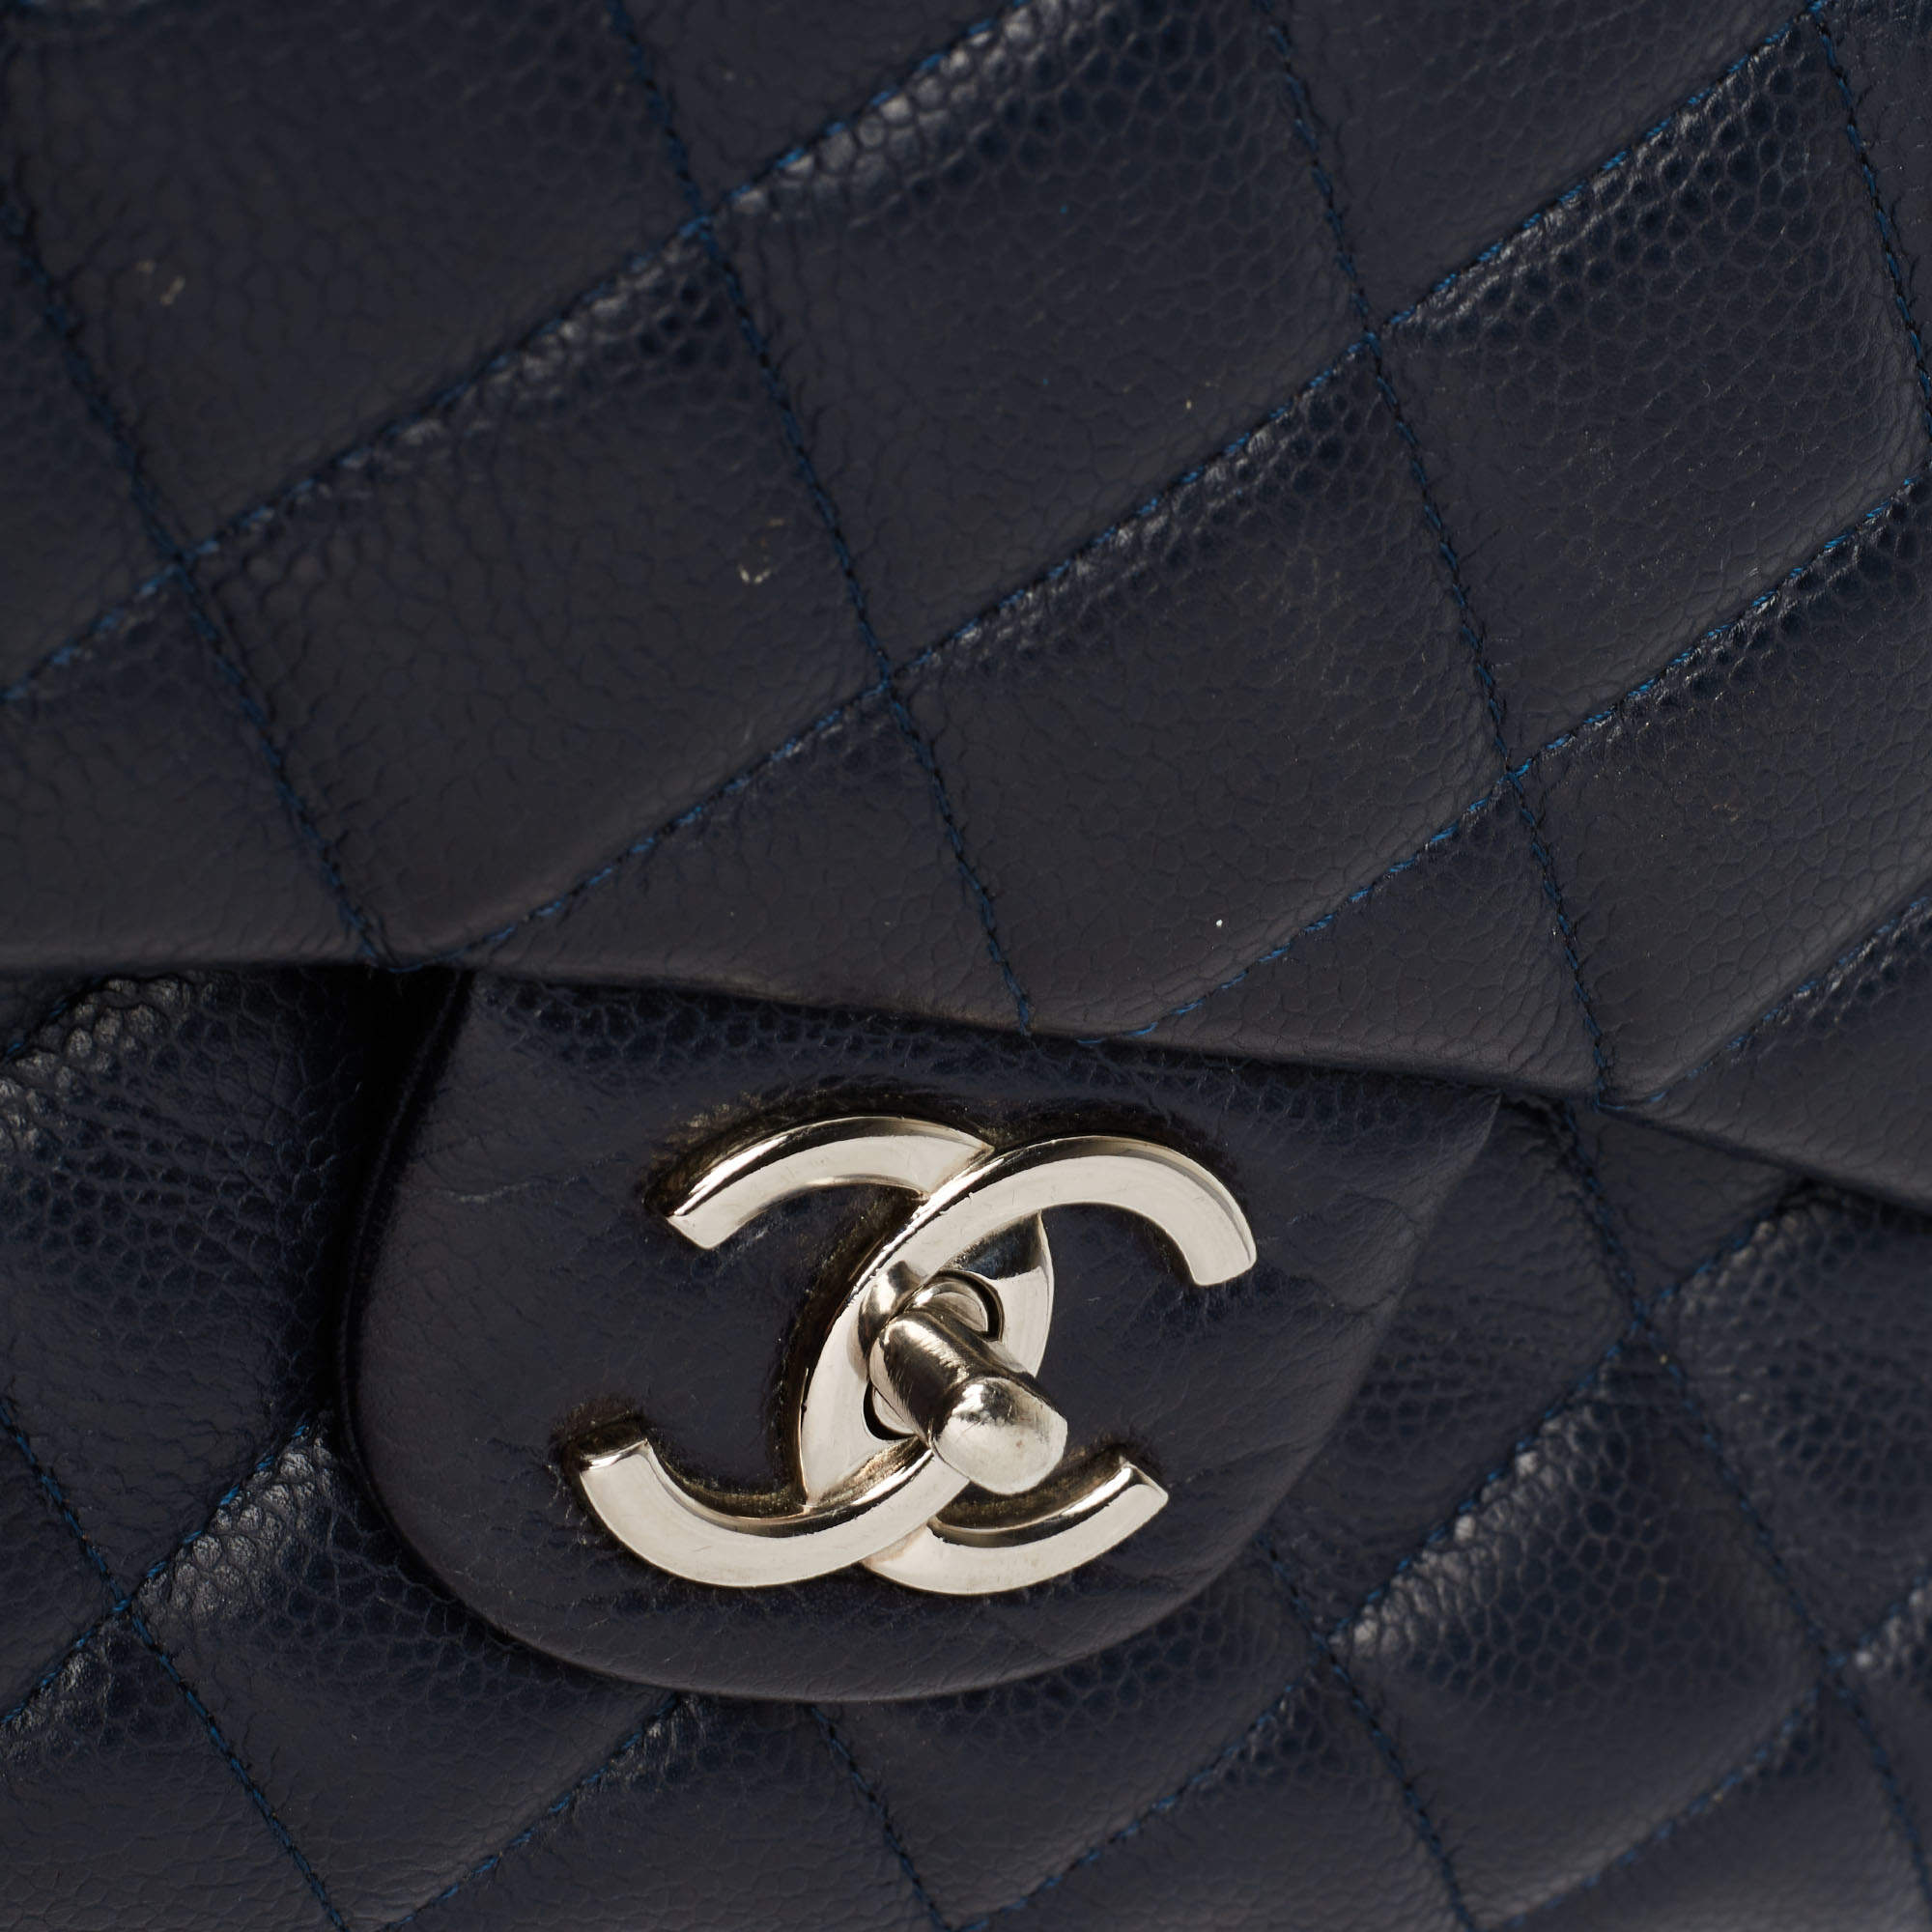 Chanel Navy Blue Quilted Caviar Leather Maxi Classic Double Flap